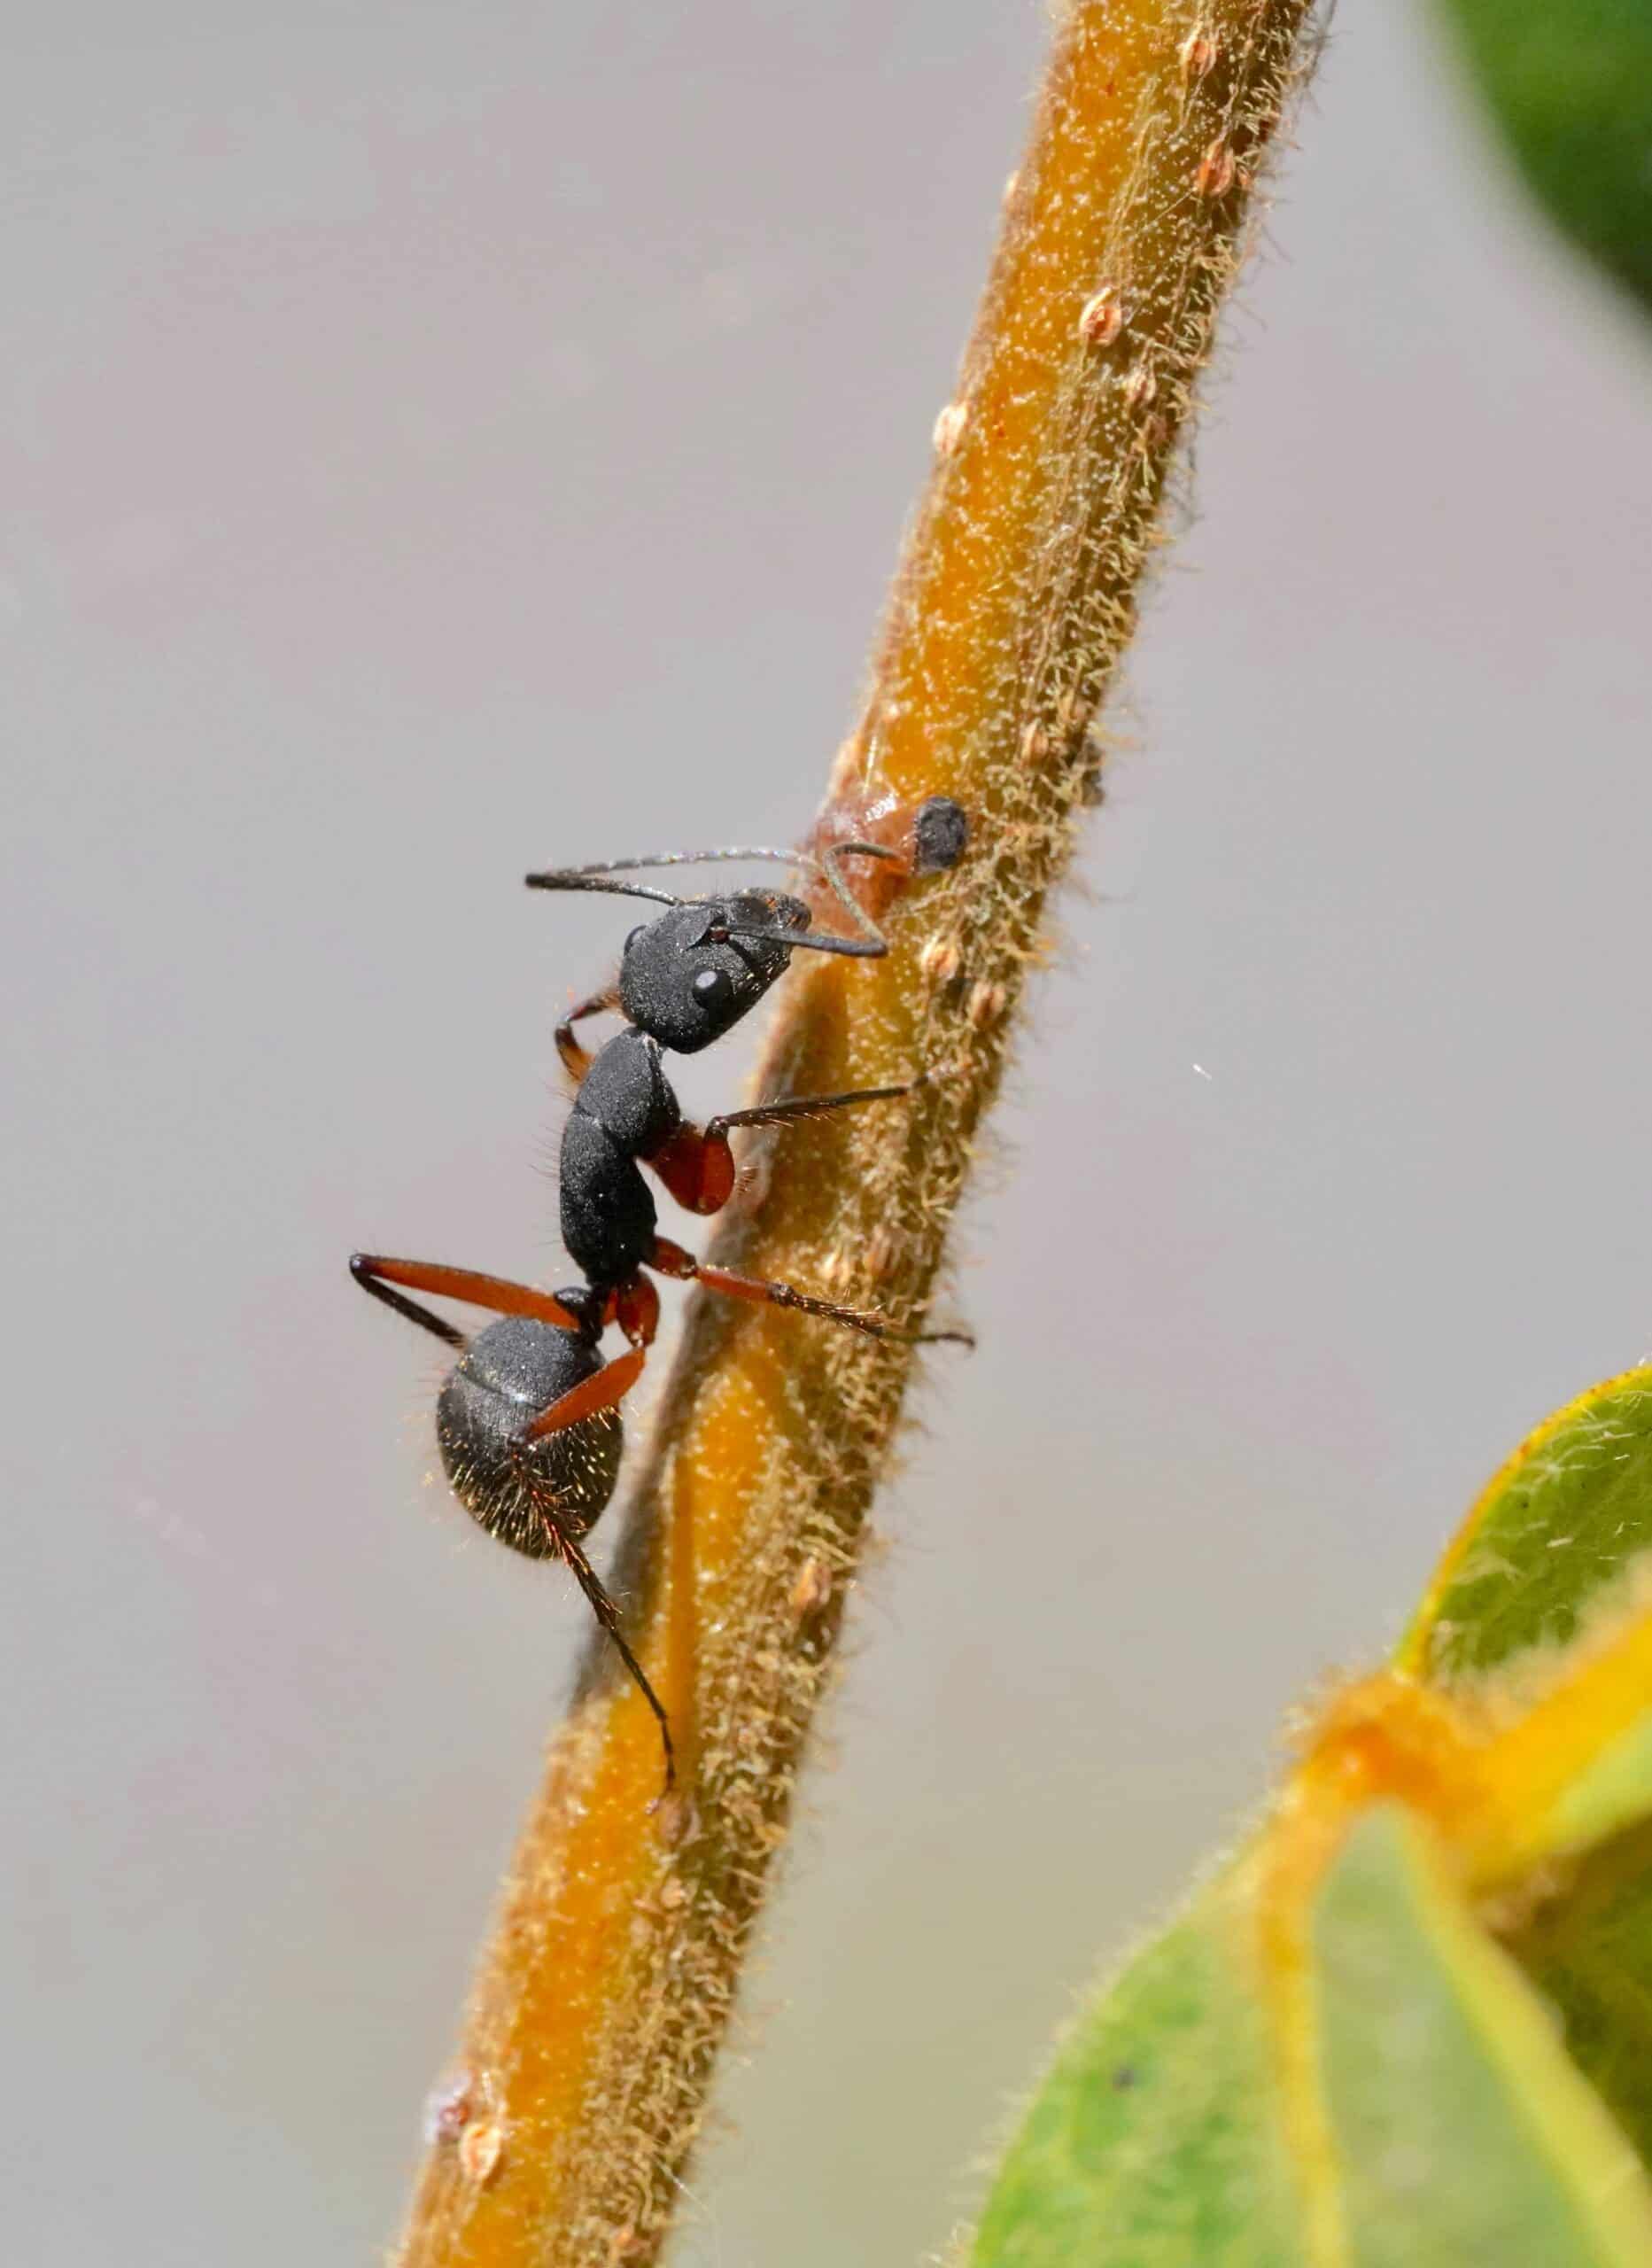 the adult ant